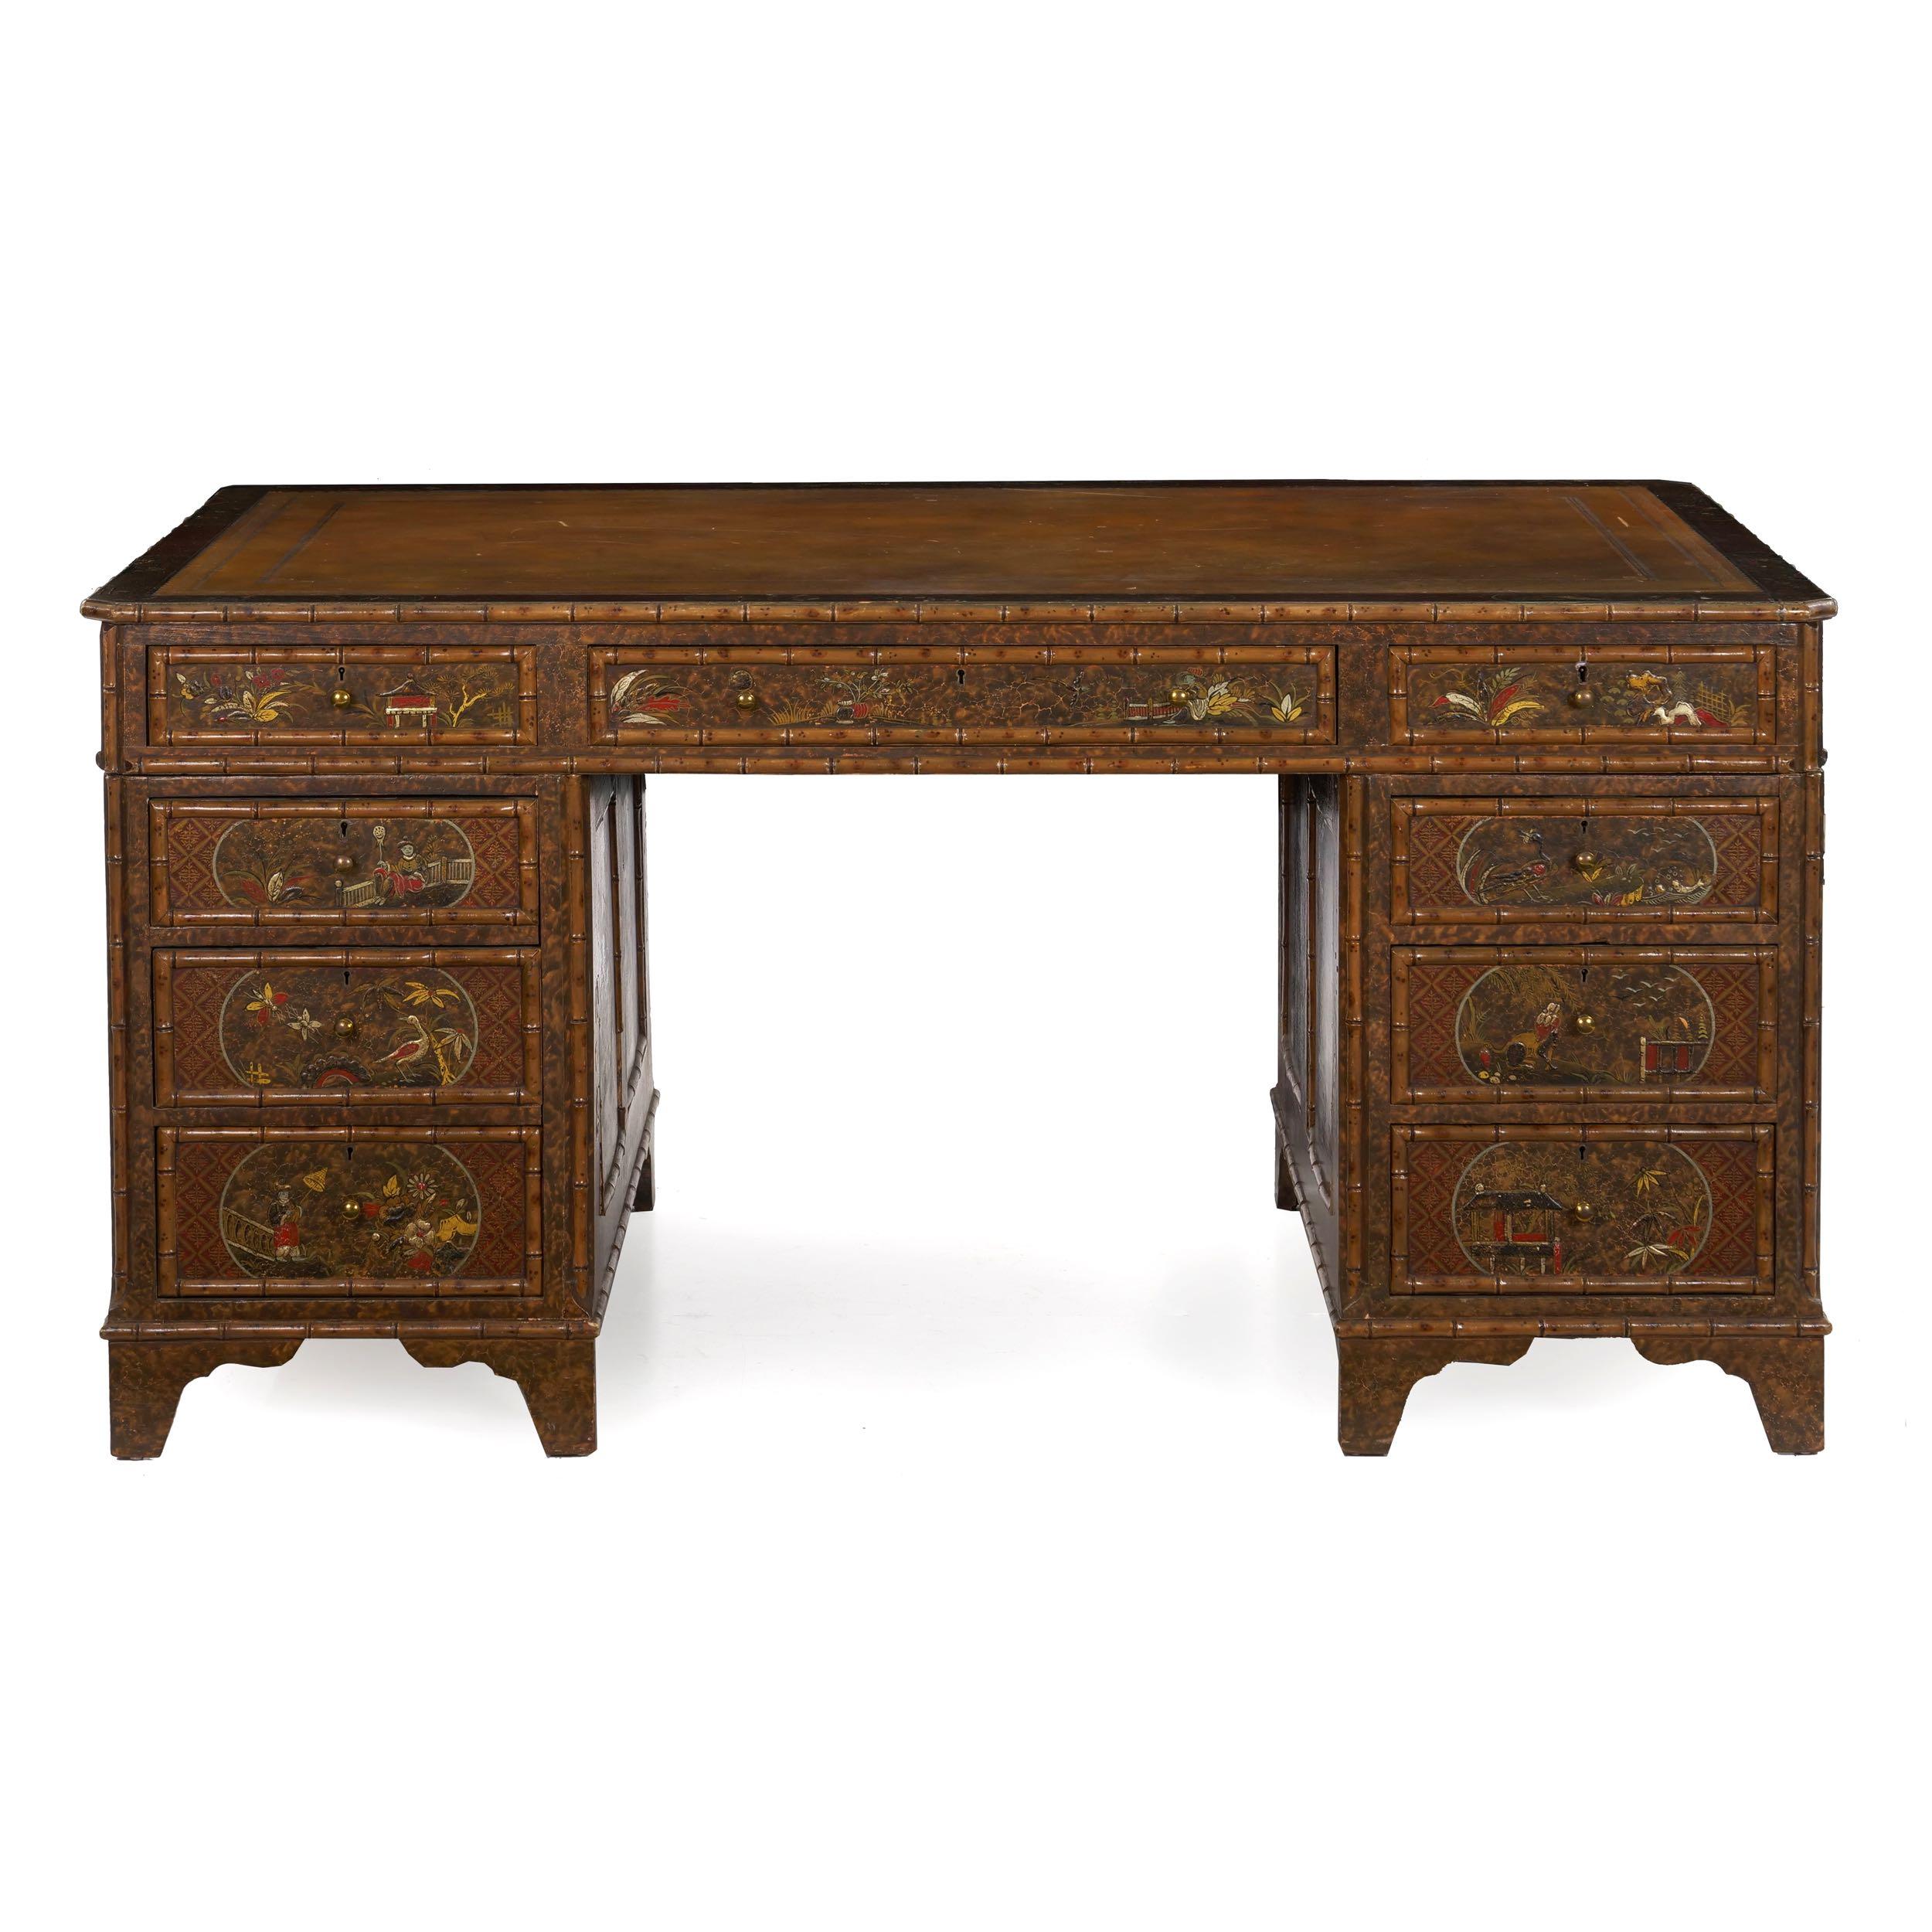 An unusually interesting pedestal desk from the last quarter of the 19th century, this gorgeous piece is designed in the George III taste with an attractive angularity to the case. In the typical manner, the top lifts free of the pedestals without